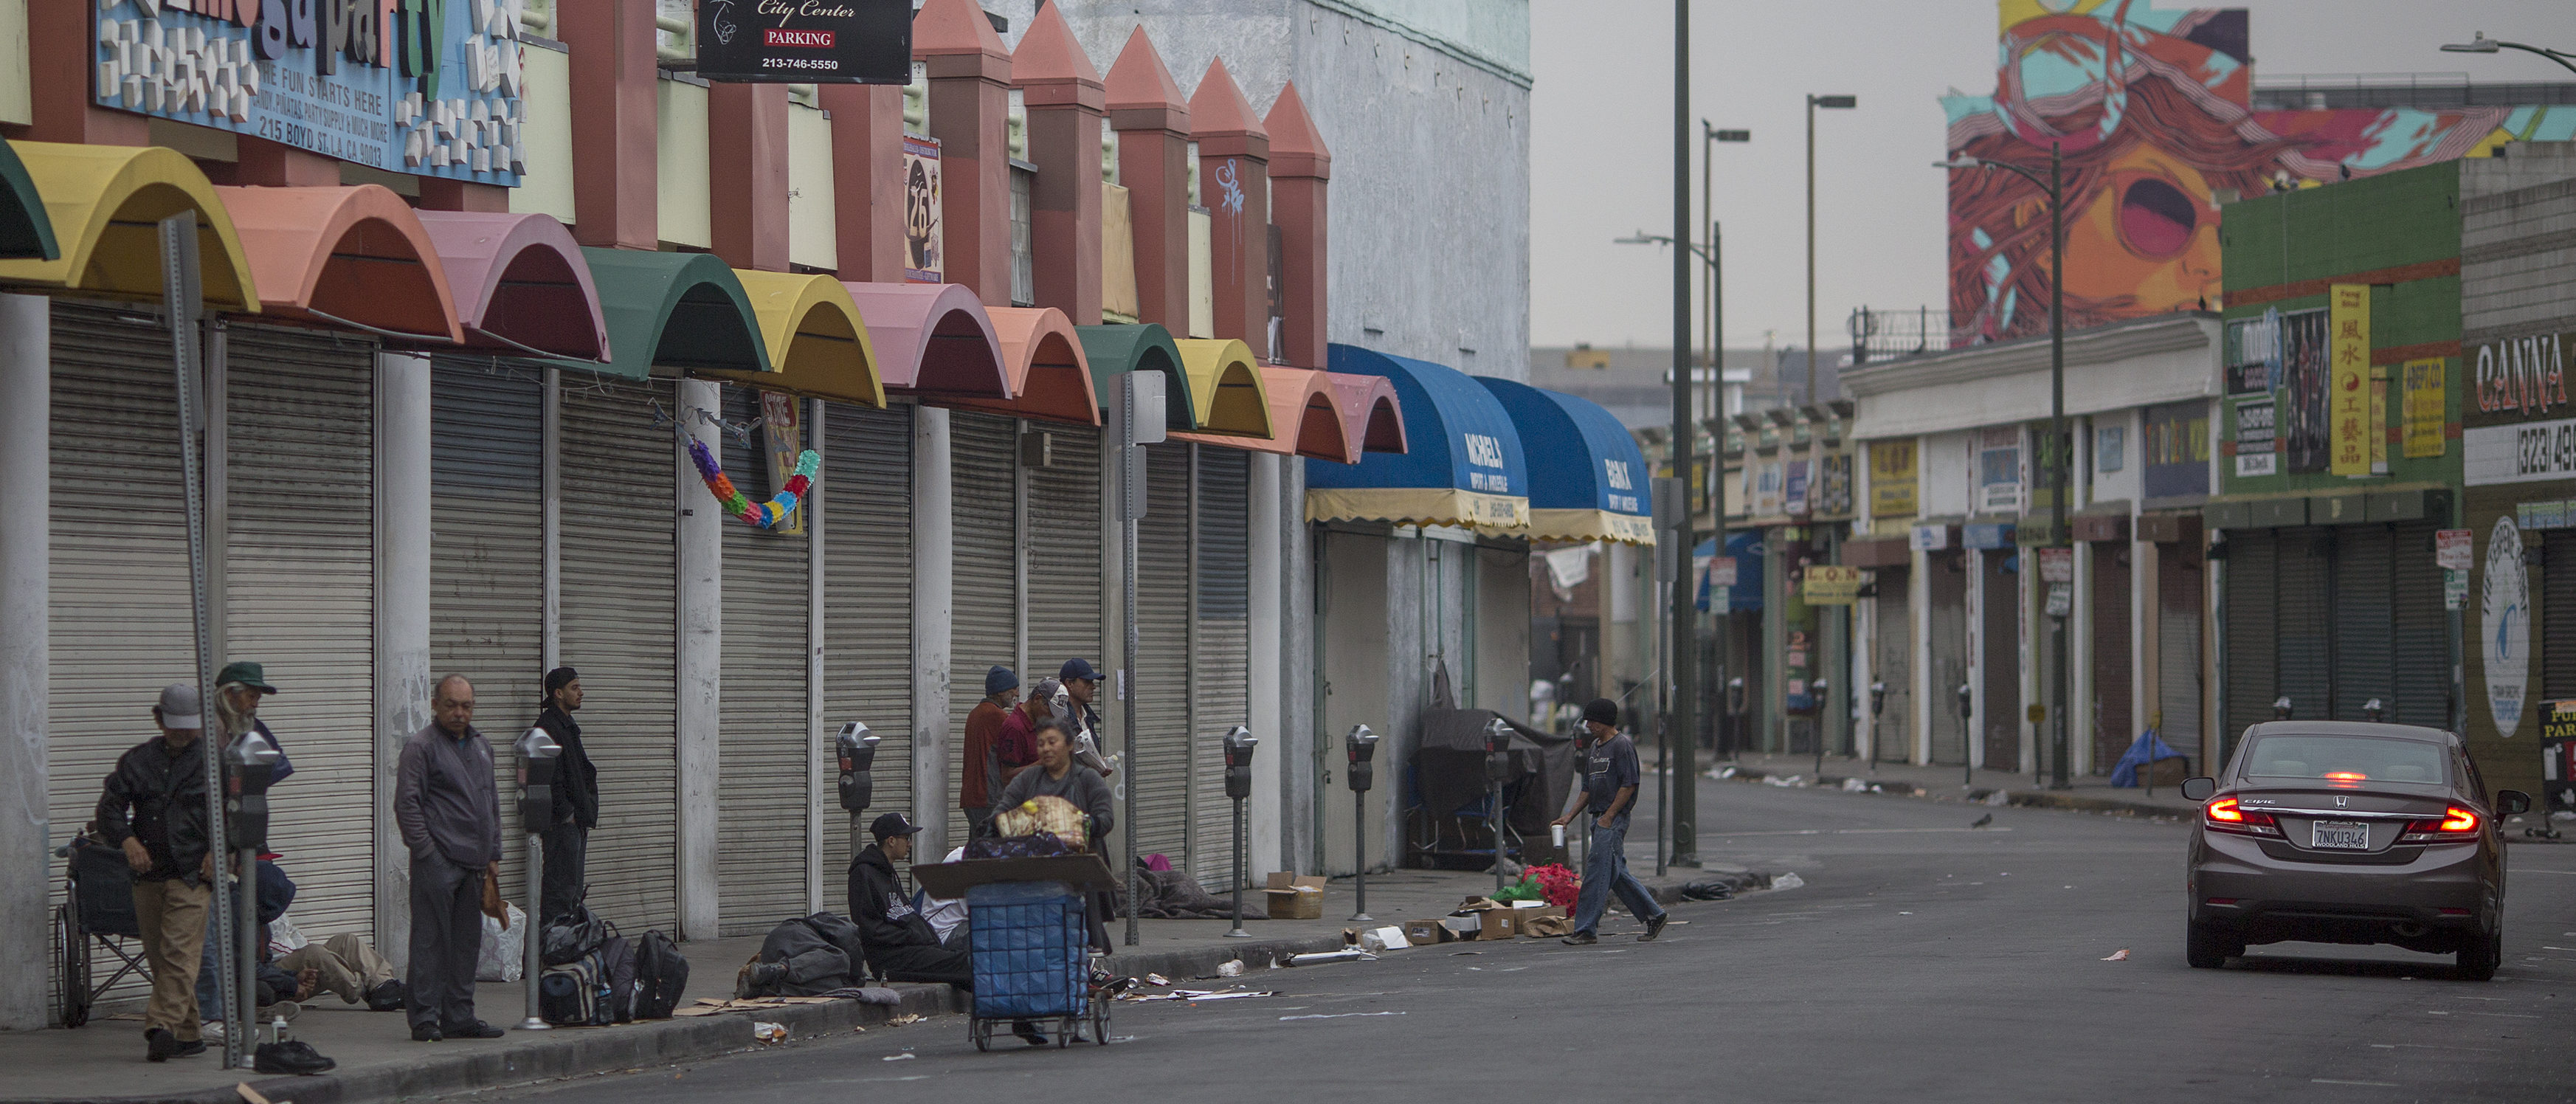 LOS ANGELES, CA - JUNE 01: Homeless people mill around on a Skid Row sidewalk after packing up their tents for the day and before businesses open on May 1, 2017 in Los Angeles, California. The newly released 2017 Greater Los Angeles Homeless Count indicates a 20 percent jump in the city of Los Angeles while Los Angeles County has spiked 23 percent. Voters have approved a record number of funds for homeless services with the passage of Measure HHH in the city and Measure H countywide. (Photo by David McNew/Getty Images)